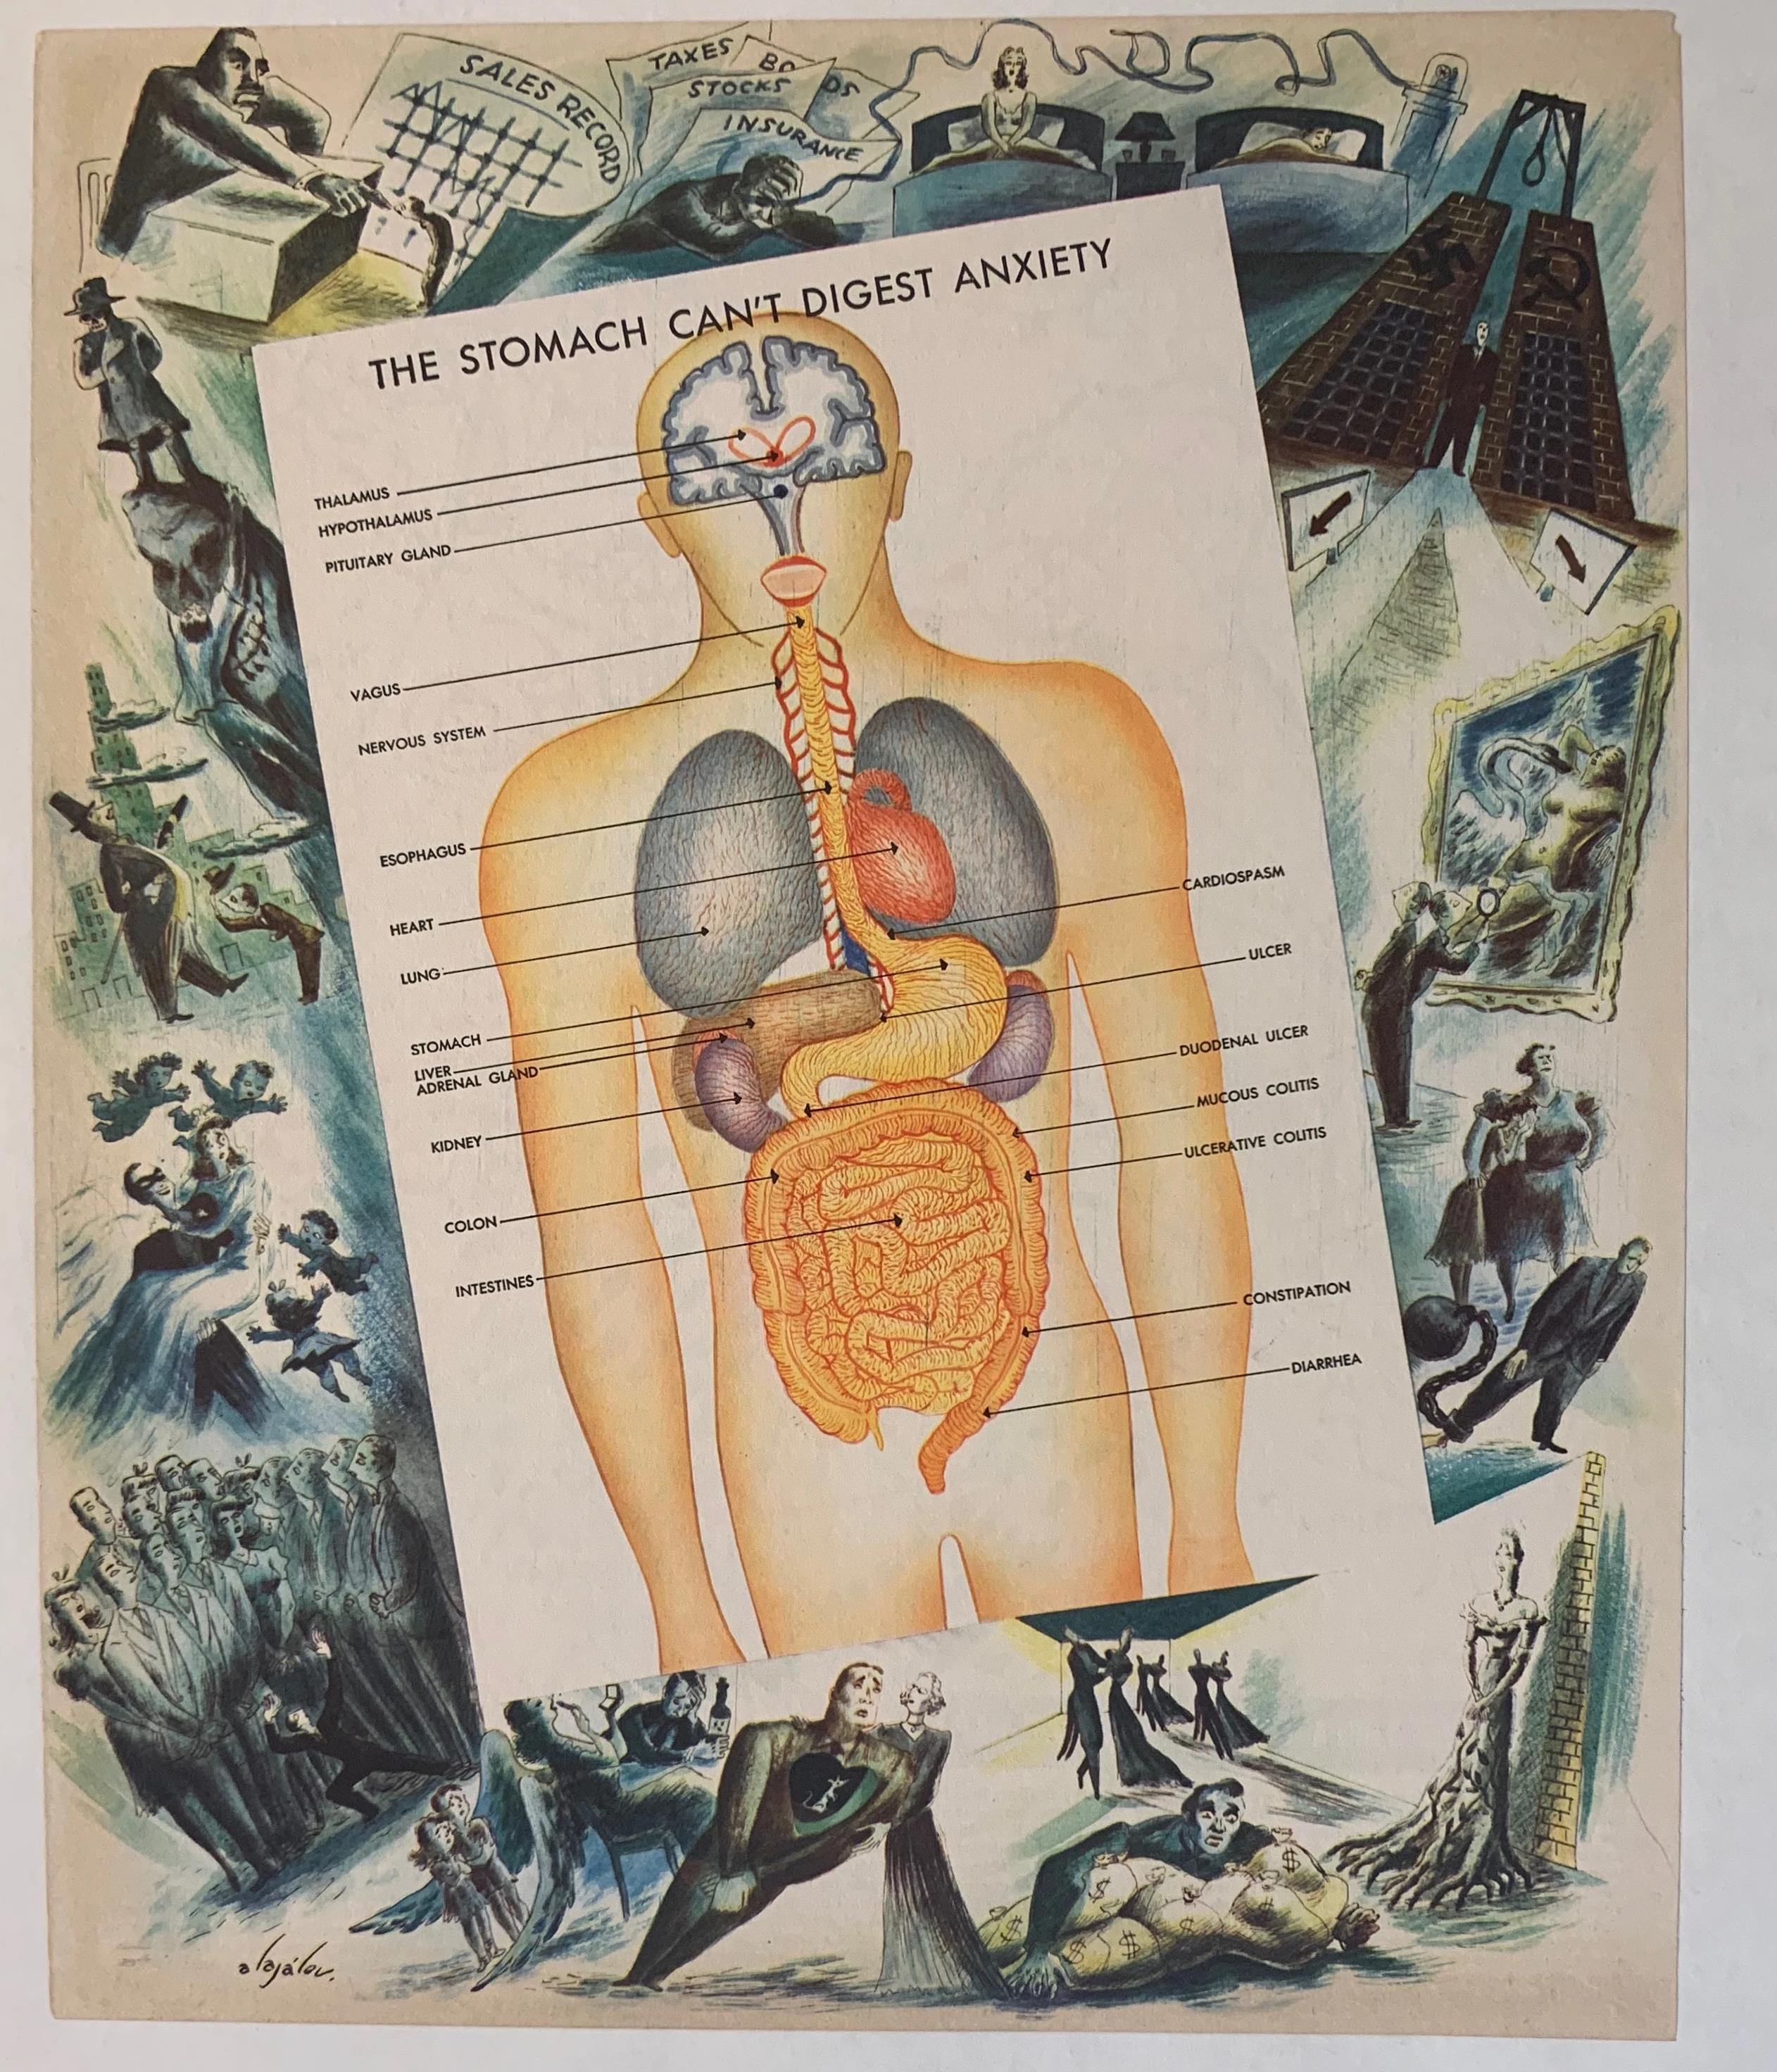 The Stomach can't digest anxiety - Poster Museum